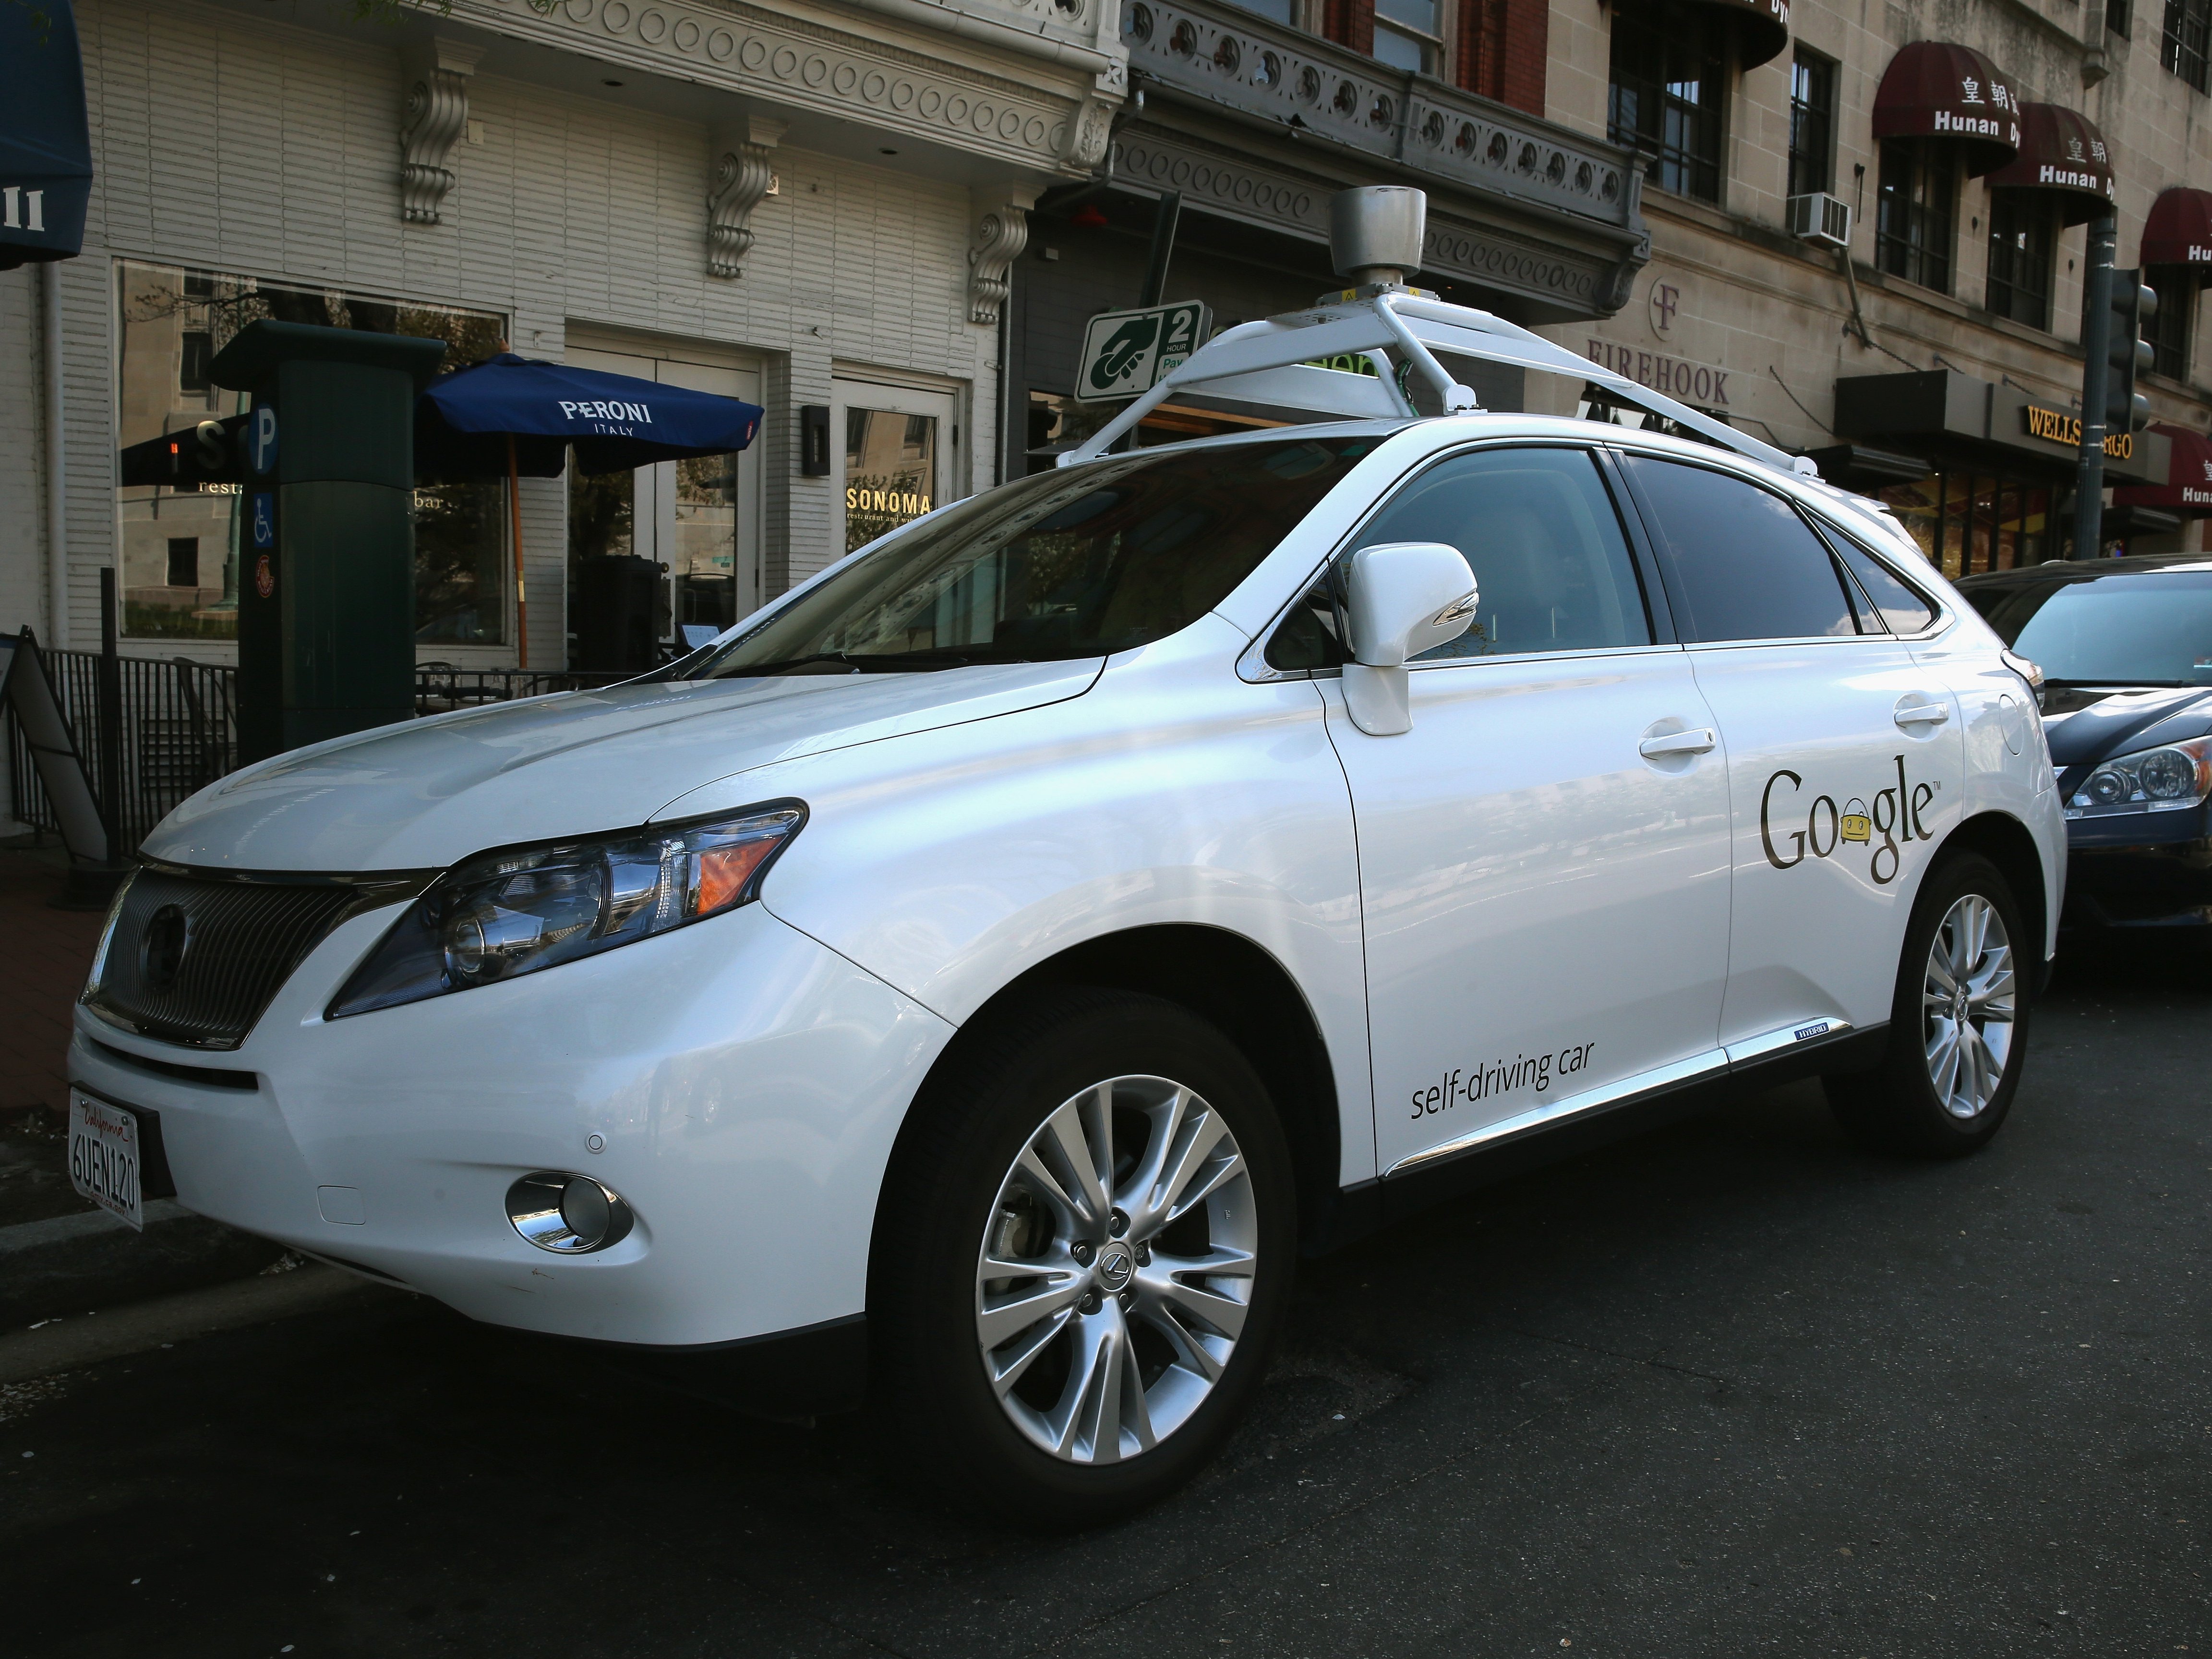 Google’s self-driving car got in the first accident that was truly its fault, but it was going only 2 miles an hour